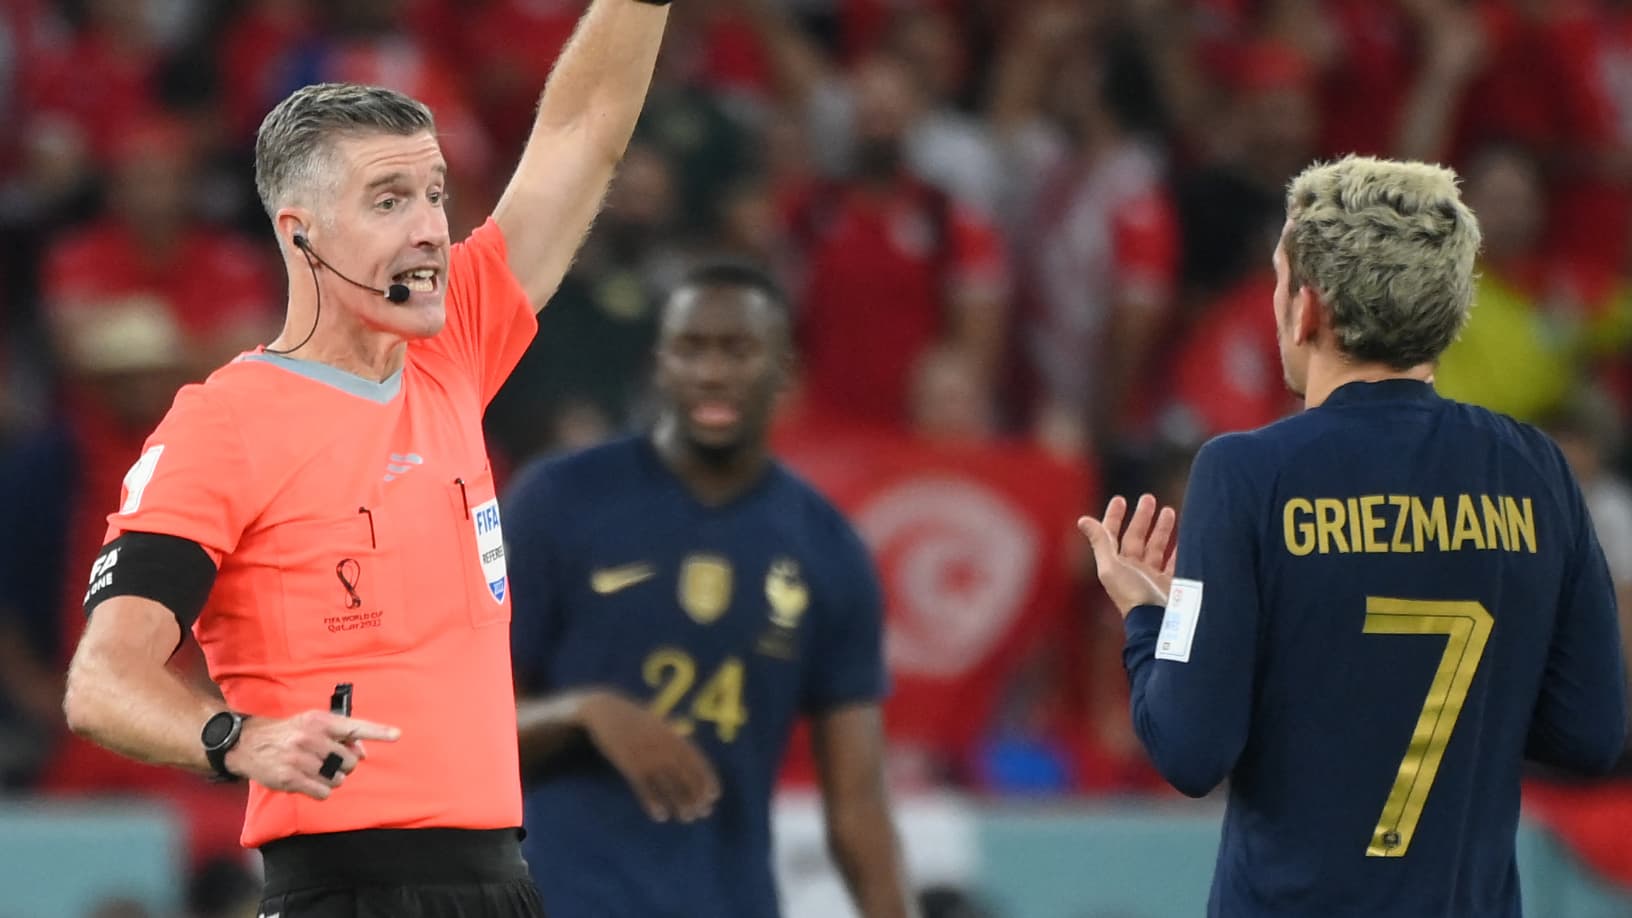 Many referees were expelled for the rest of the World Cup matches, including the referees of France and Tunisia